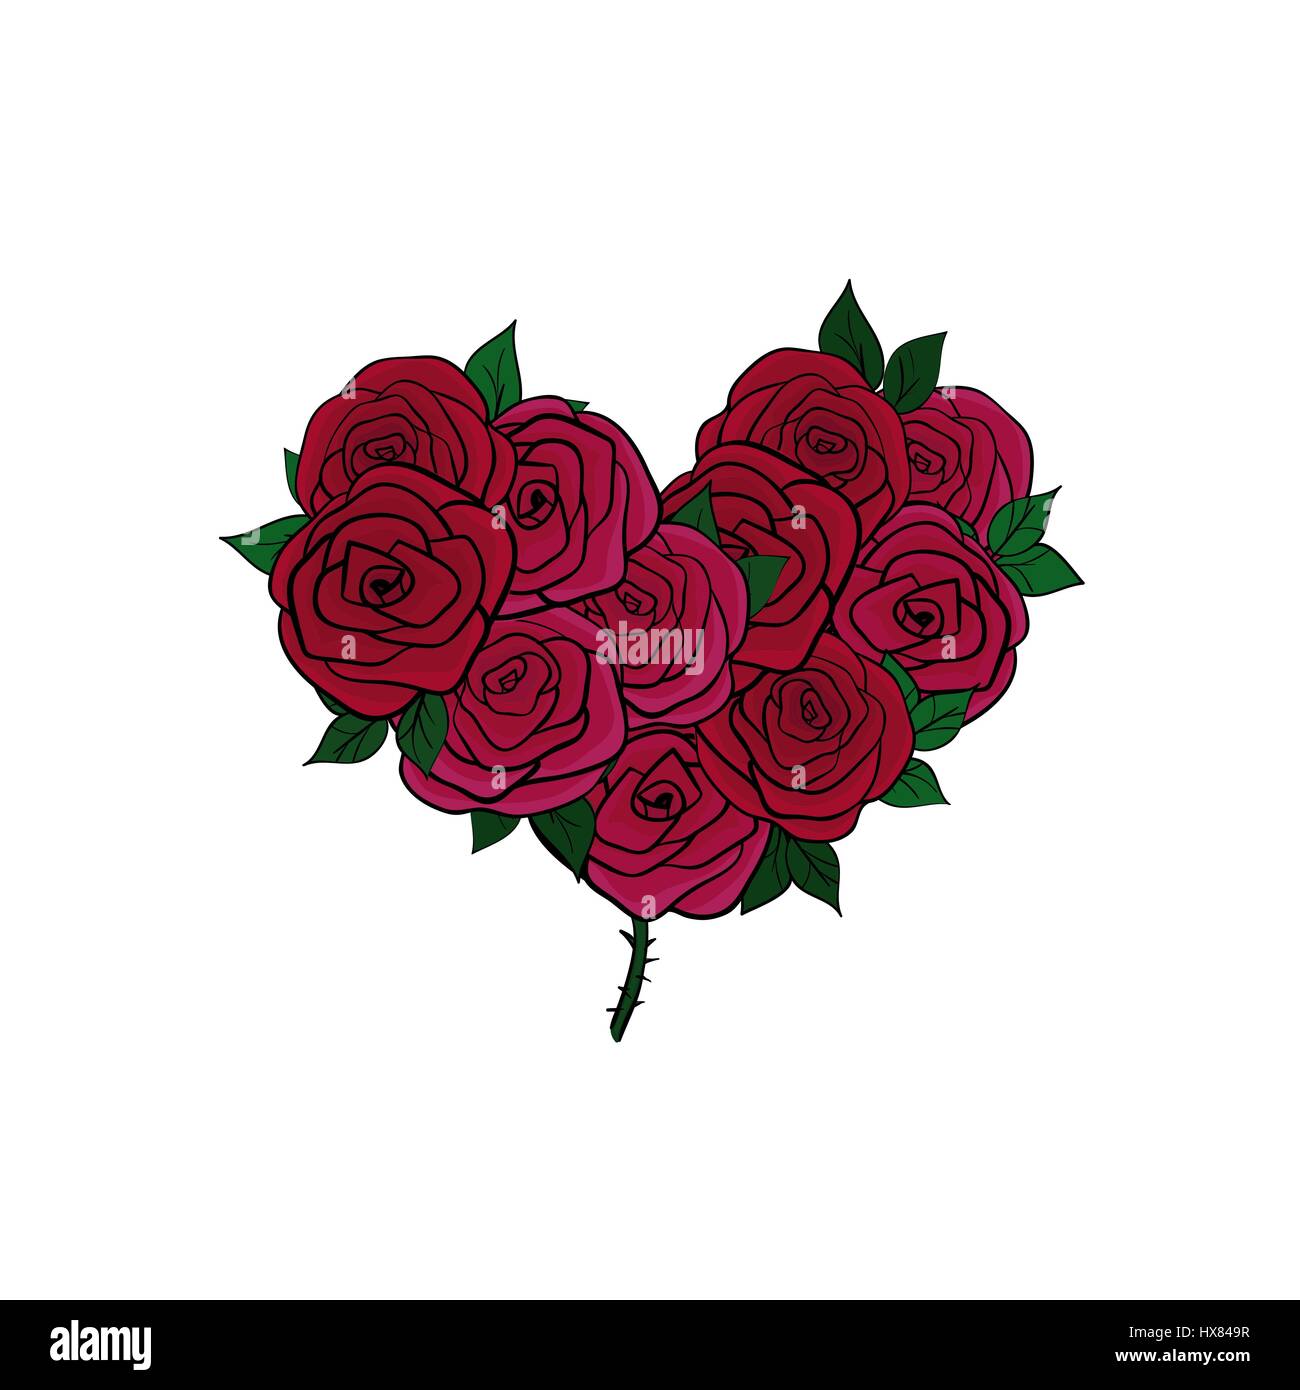 Bouquet of roses of different hues with heart shaped leaves on a stem with thorns, painted a dark outline. Isolated on white background. Hand drawn ve Stock Vector